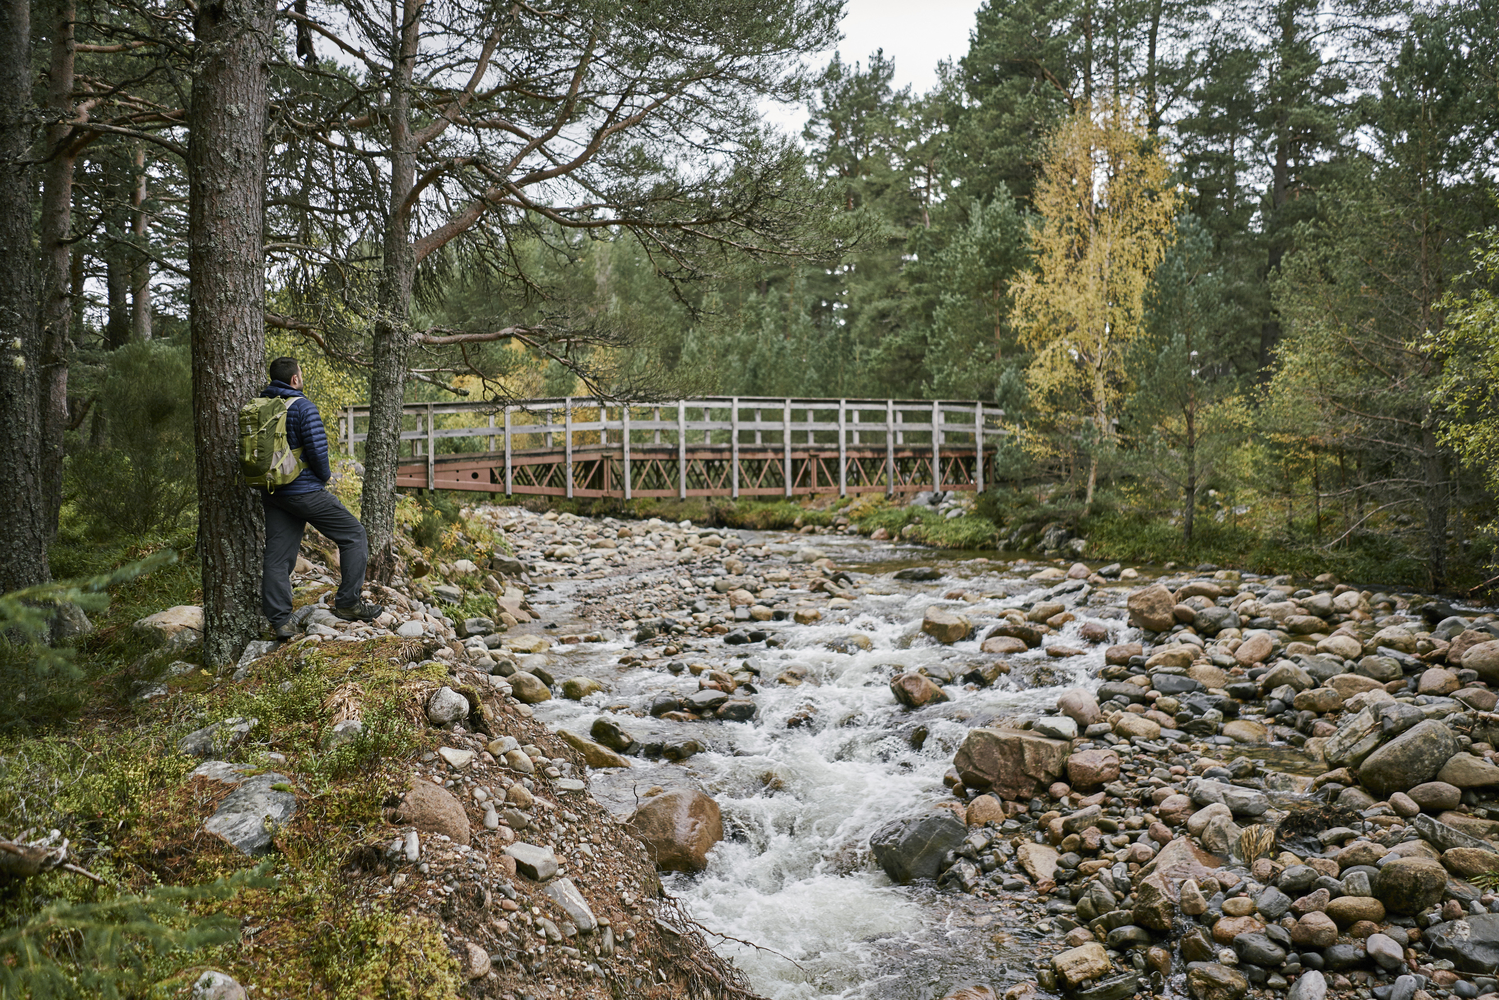 A man in a blue jacket stands before a old bridge over a rocky river